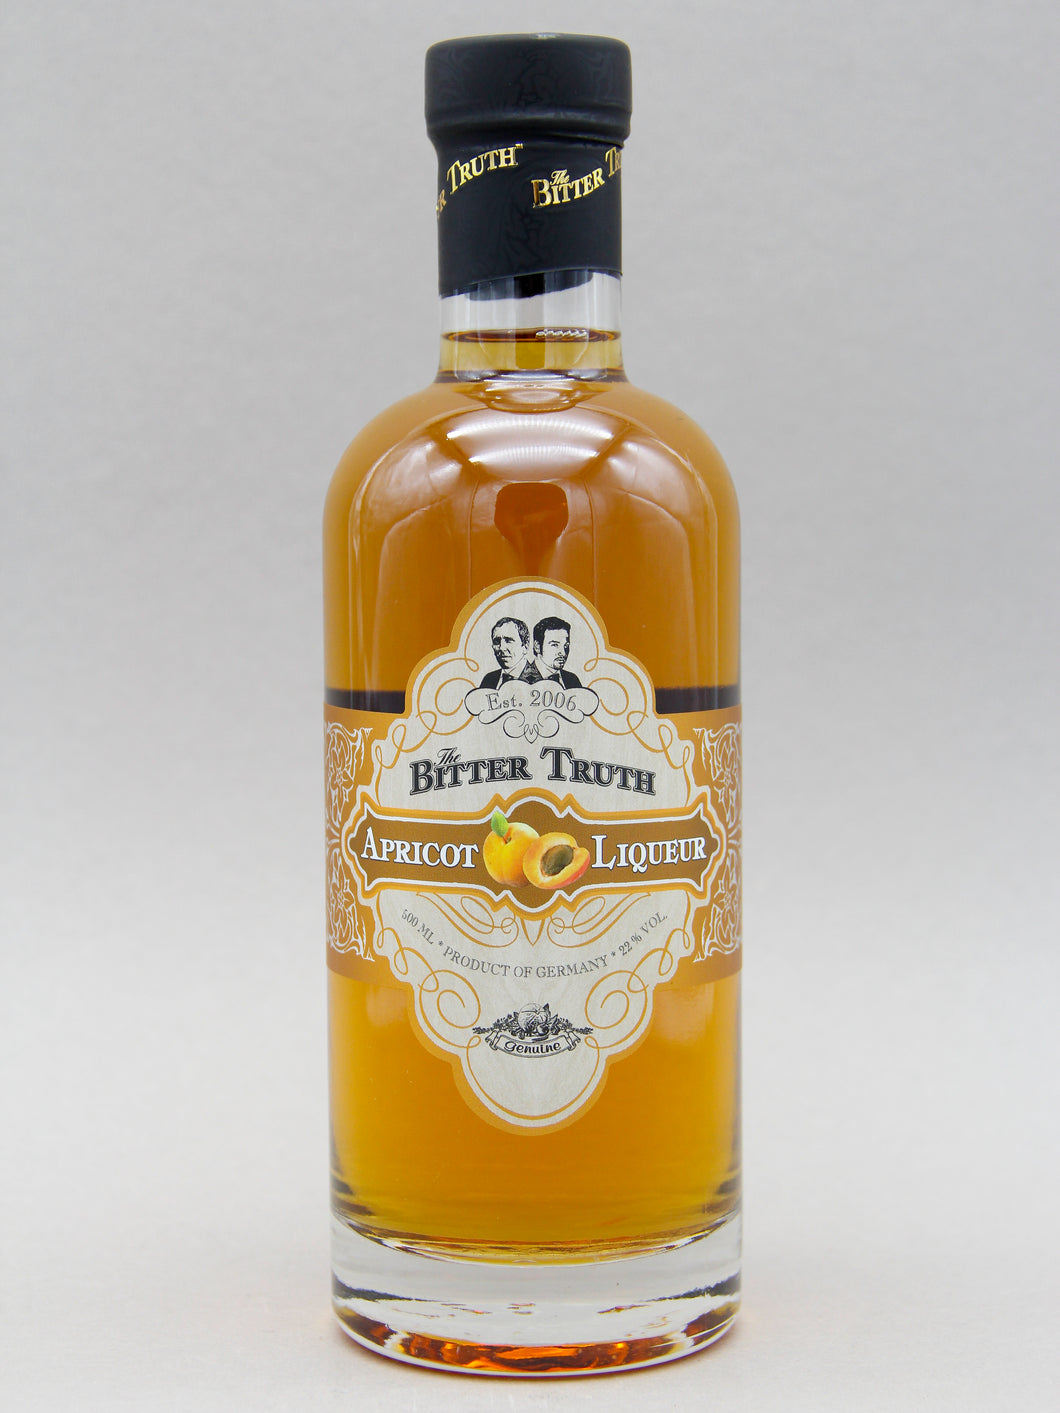 The Bitter Truth Apricot Liqueur (22%, 50cl)